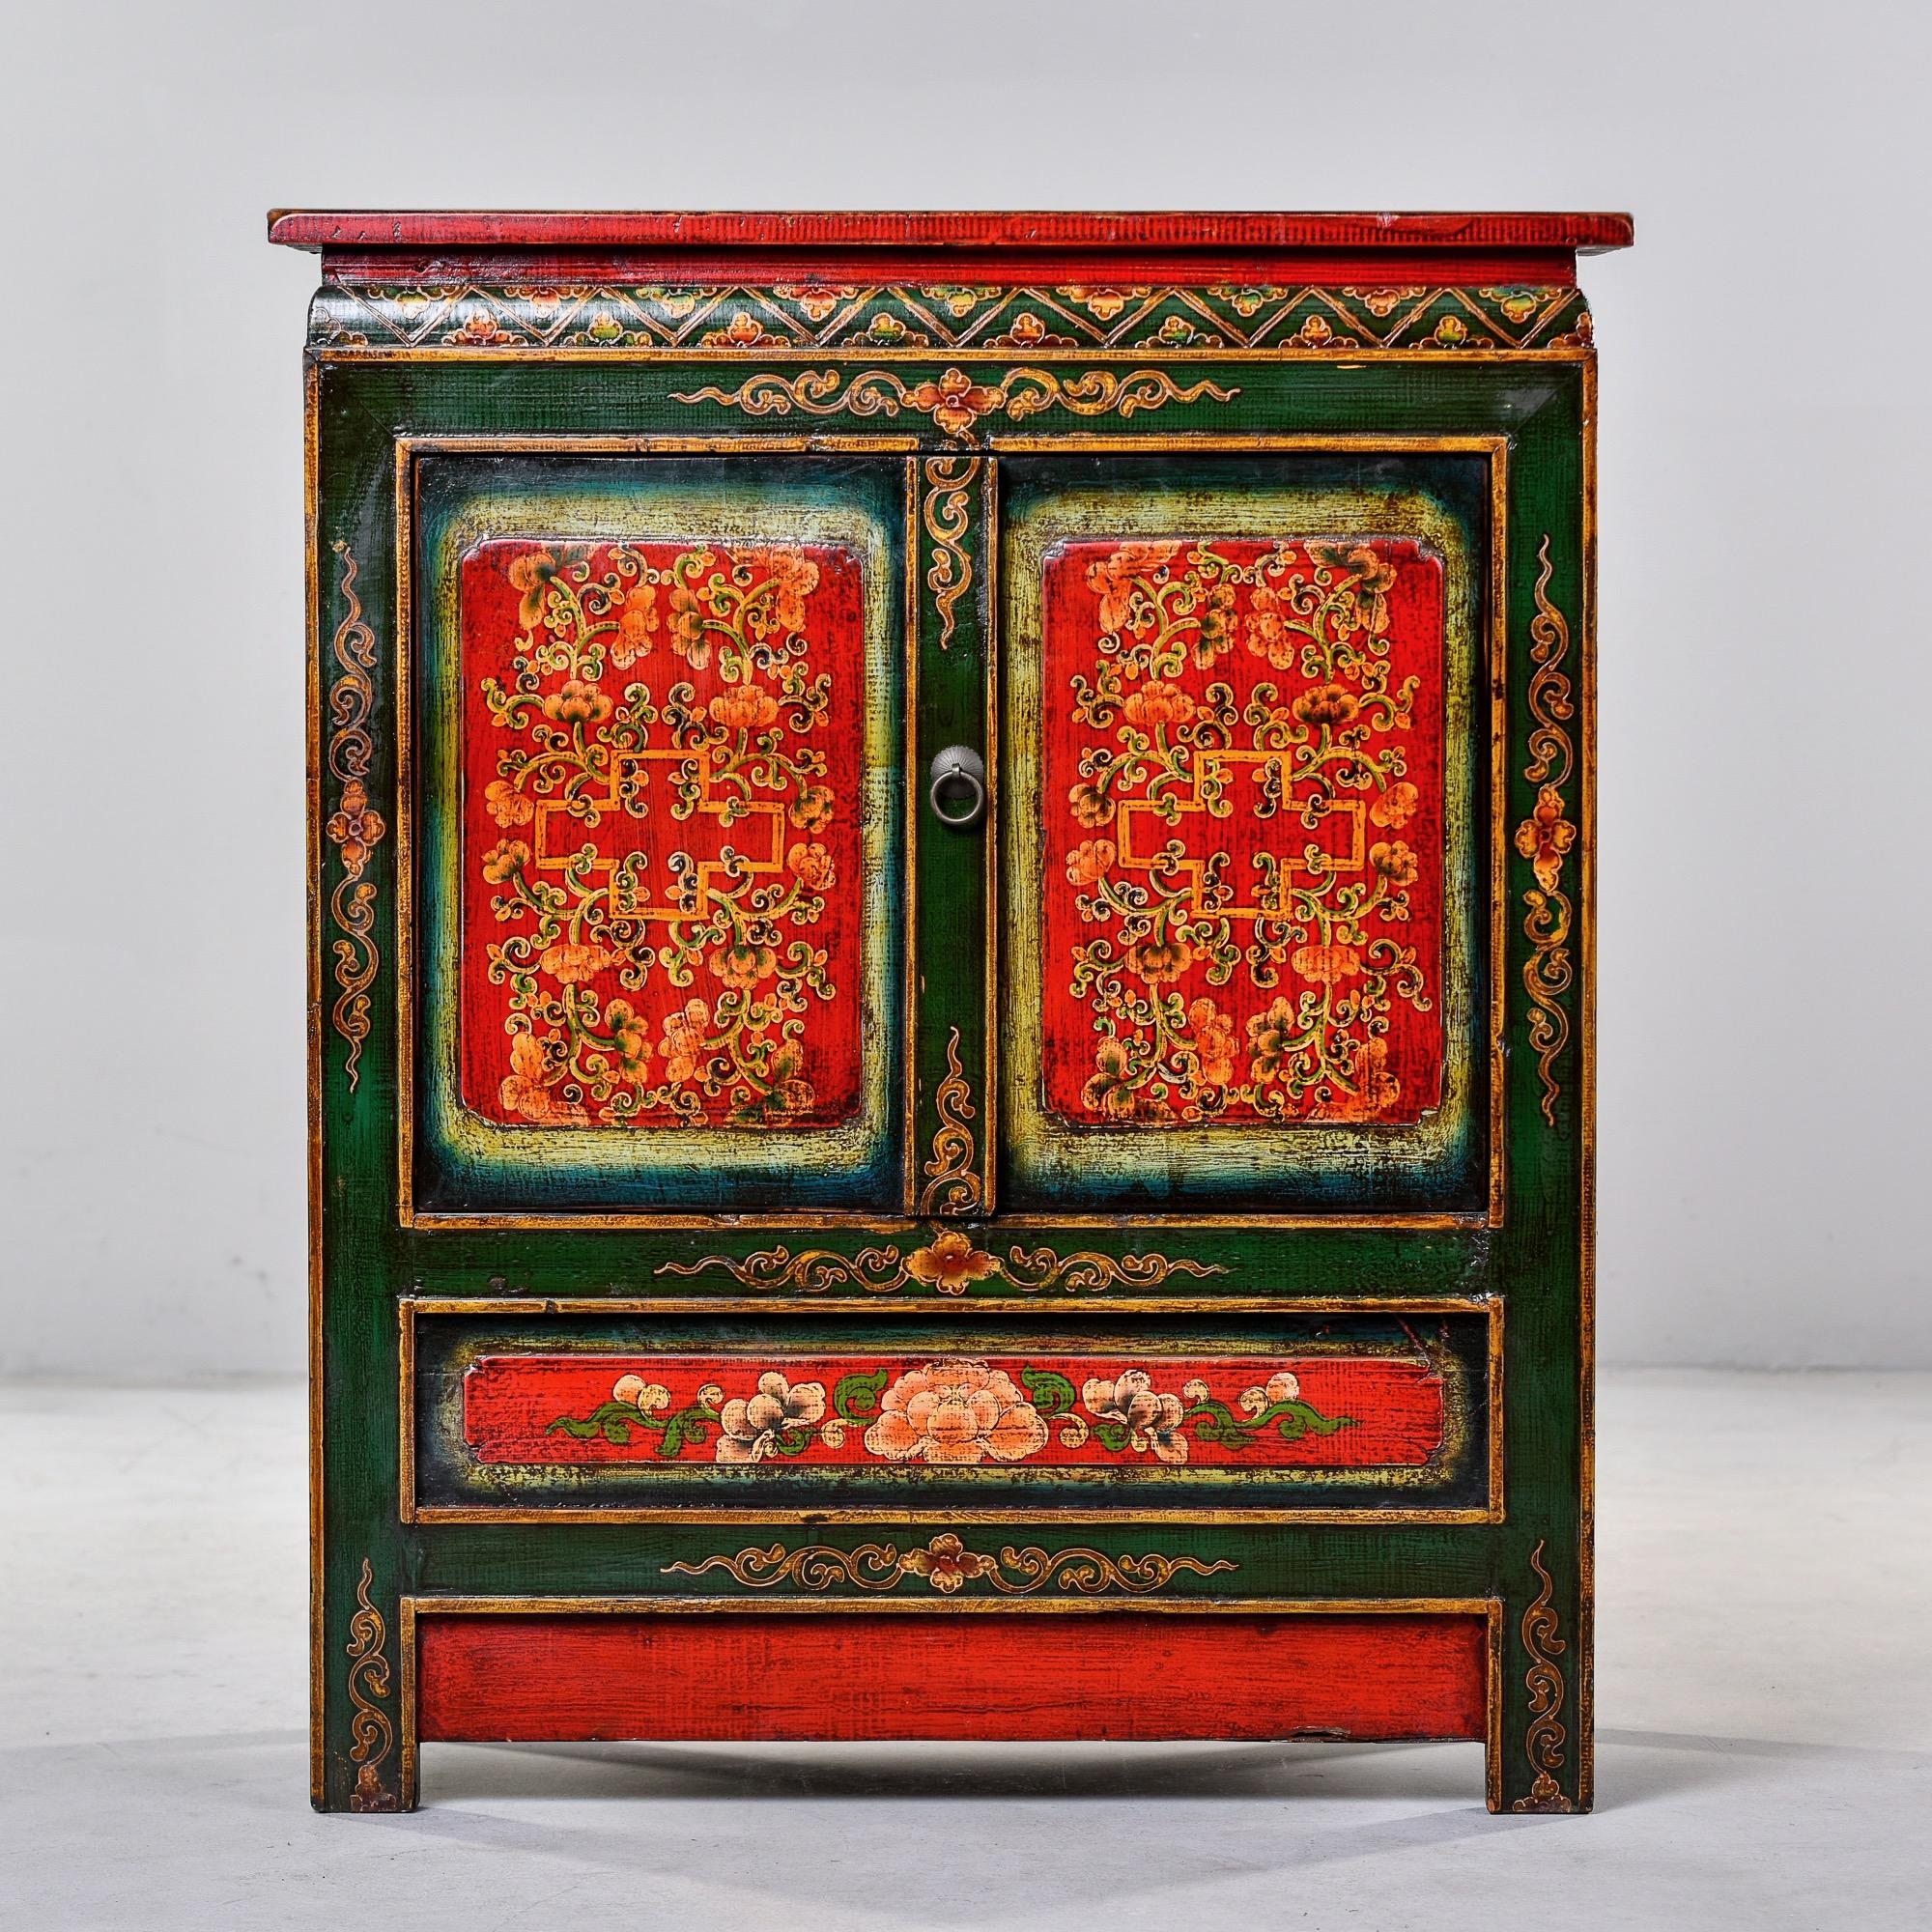 Circa 1920 Tibetan cabinet in vibrant shades of red and green. Hand painted floral and lattice details on front, sides and top. Two front doors open to storage with a single internal shelf. Unknown maker. Very good antique condition with minor